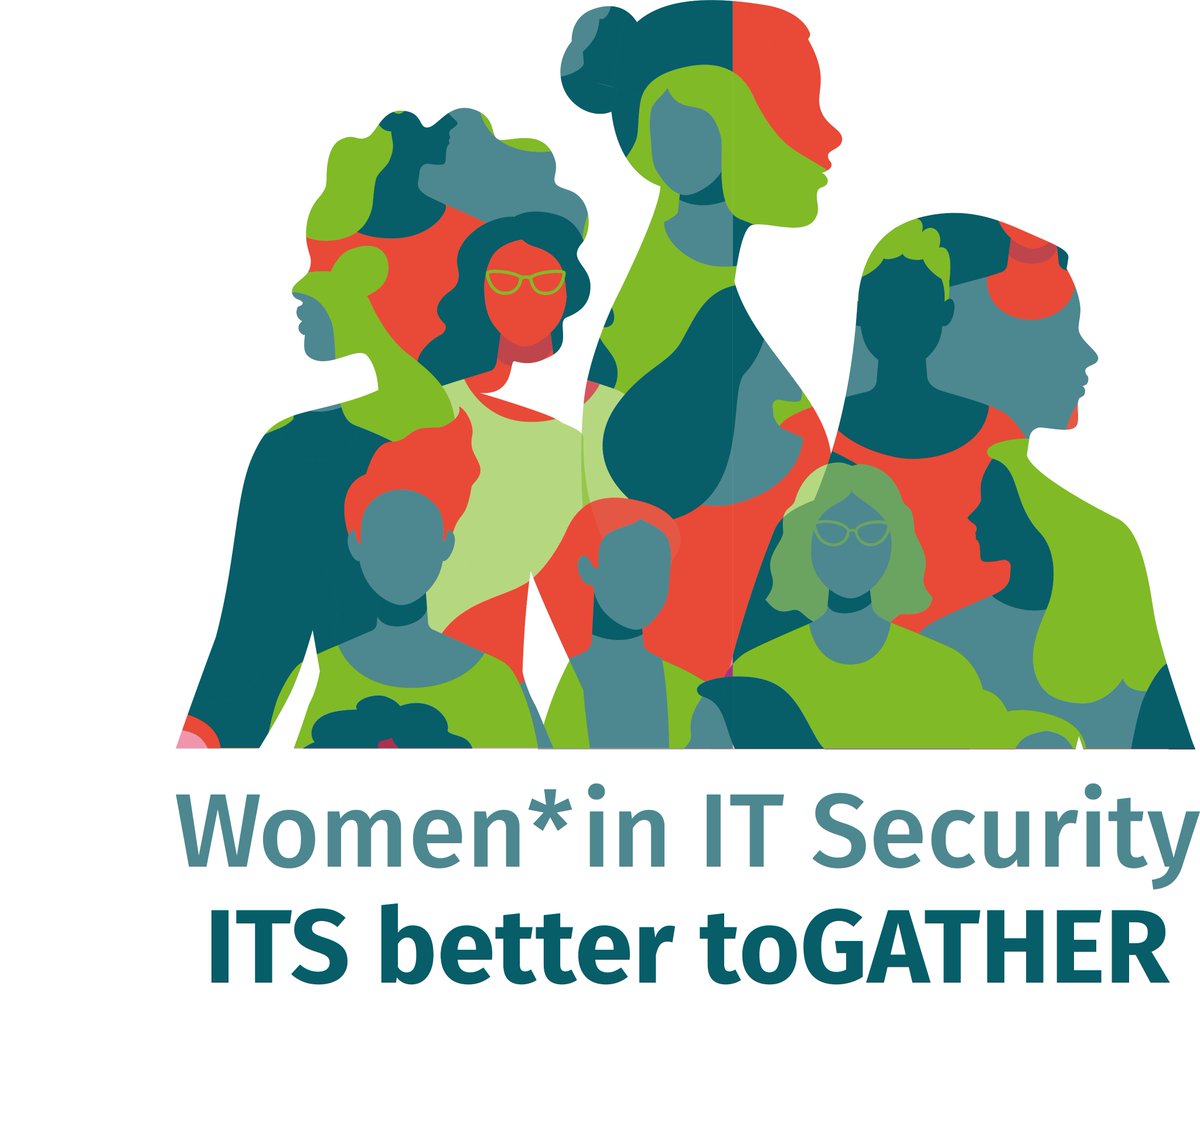 Hey #WomeninITS! Join our next #ITS better toGATHER 👉 meets @GDATA on Thursday, June 1, 4 PM, at the G DATA Campus in @bochum_de. Besides a Q&A, networking with drinks + snacks there will be a tour of the historical buildung. Details ➡️casa.rub.de/en/news/casa/w…